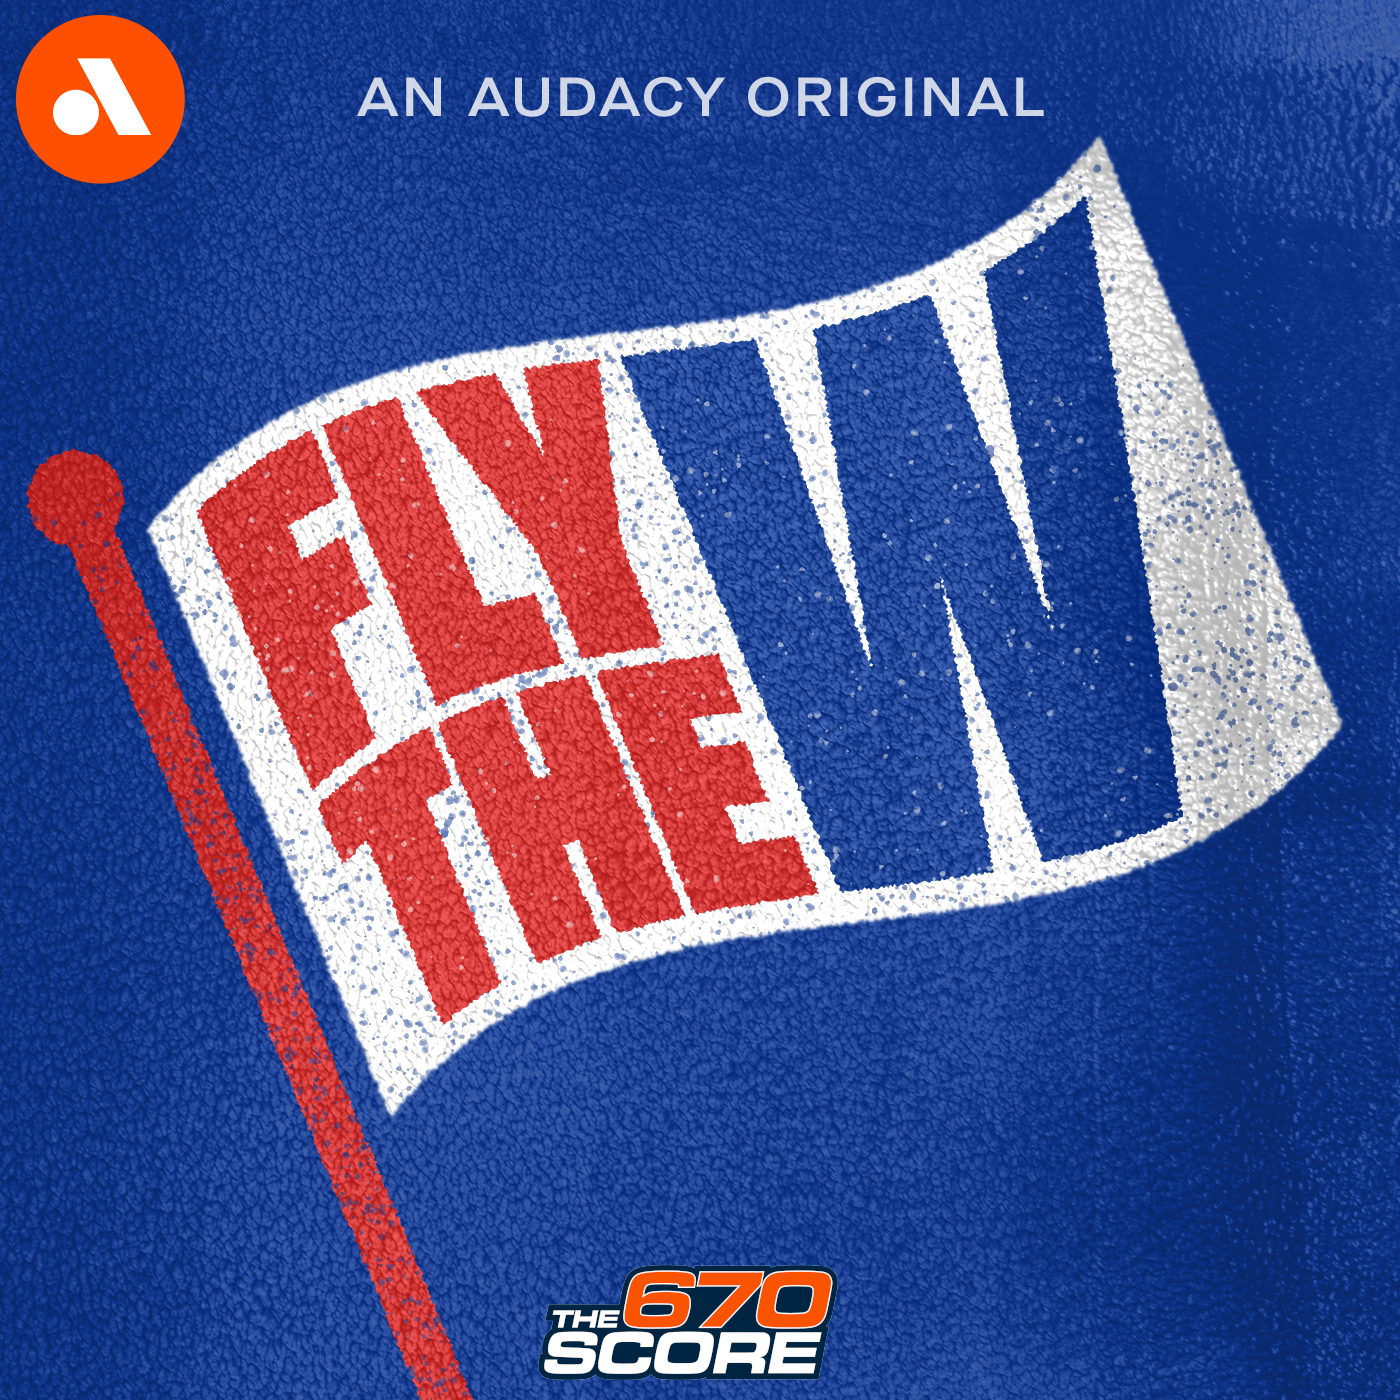 RIP Mike Brumley, Cubs-Giants preview | Fly the W